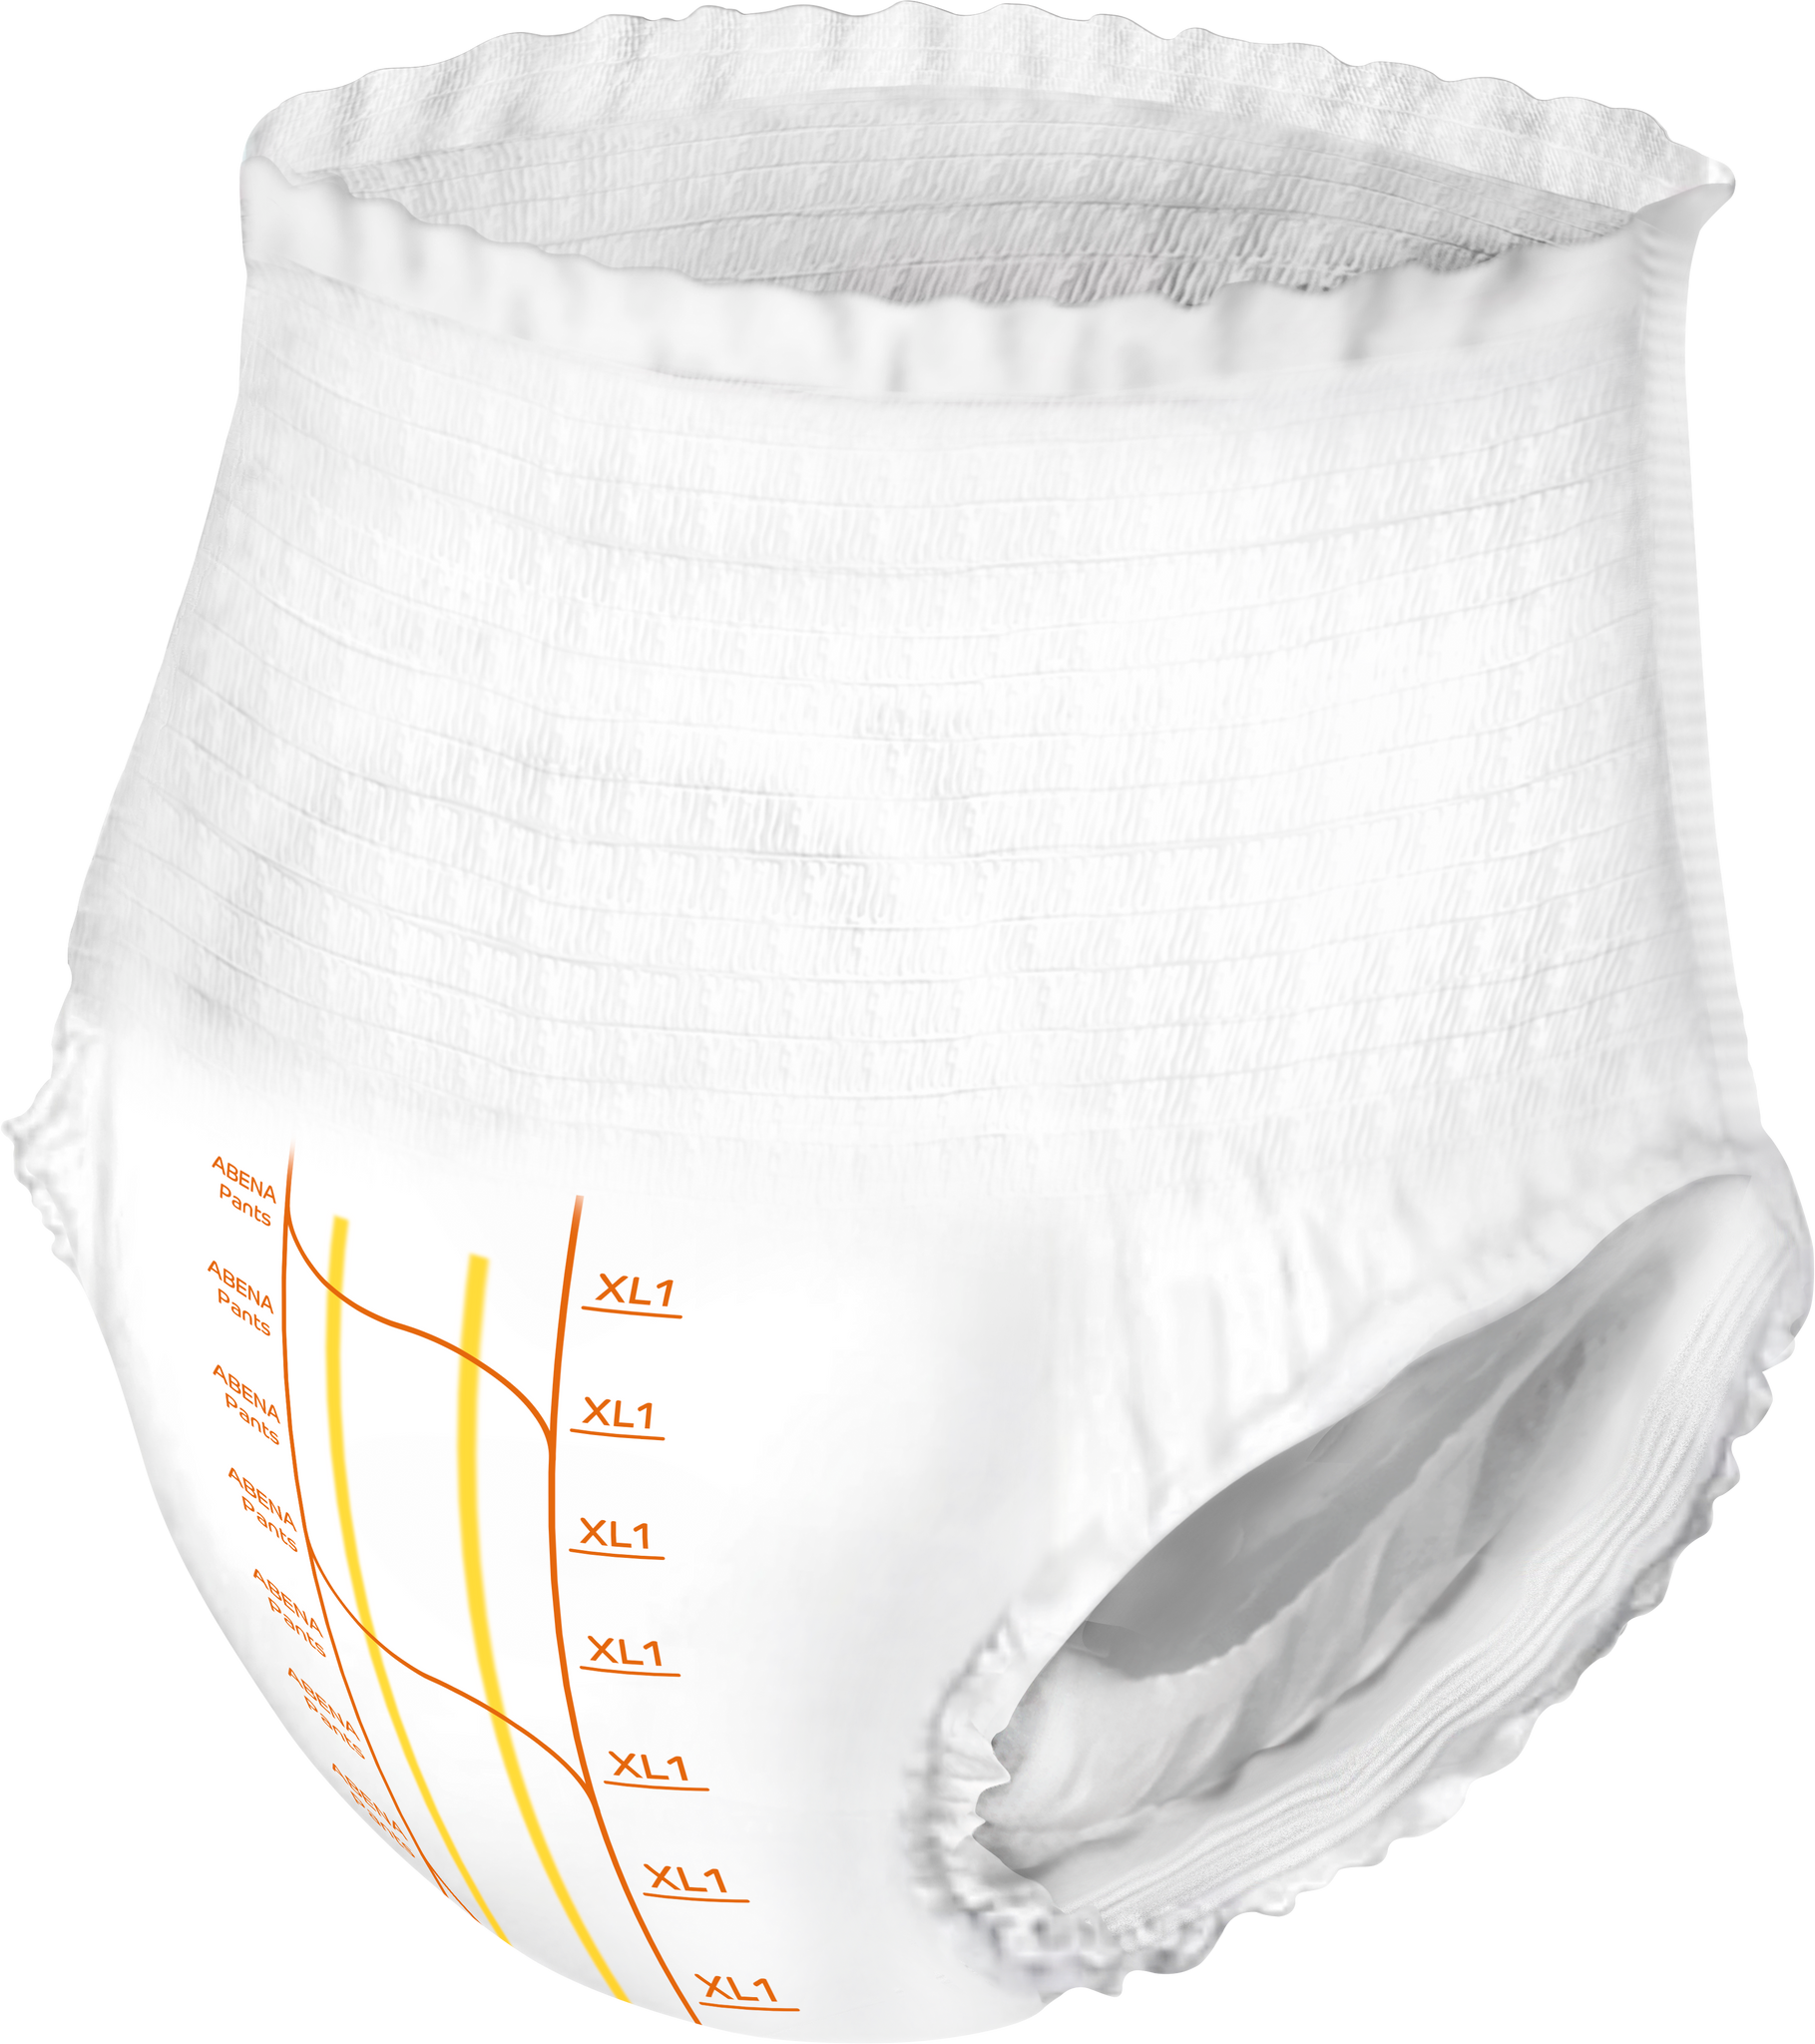 Abena Premium Pants Adult Diapers XLarge XL1 Pull Up Nappy Pack Of